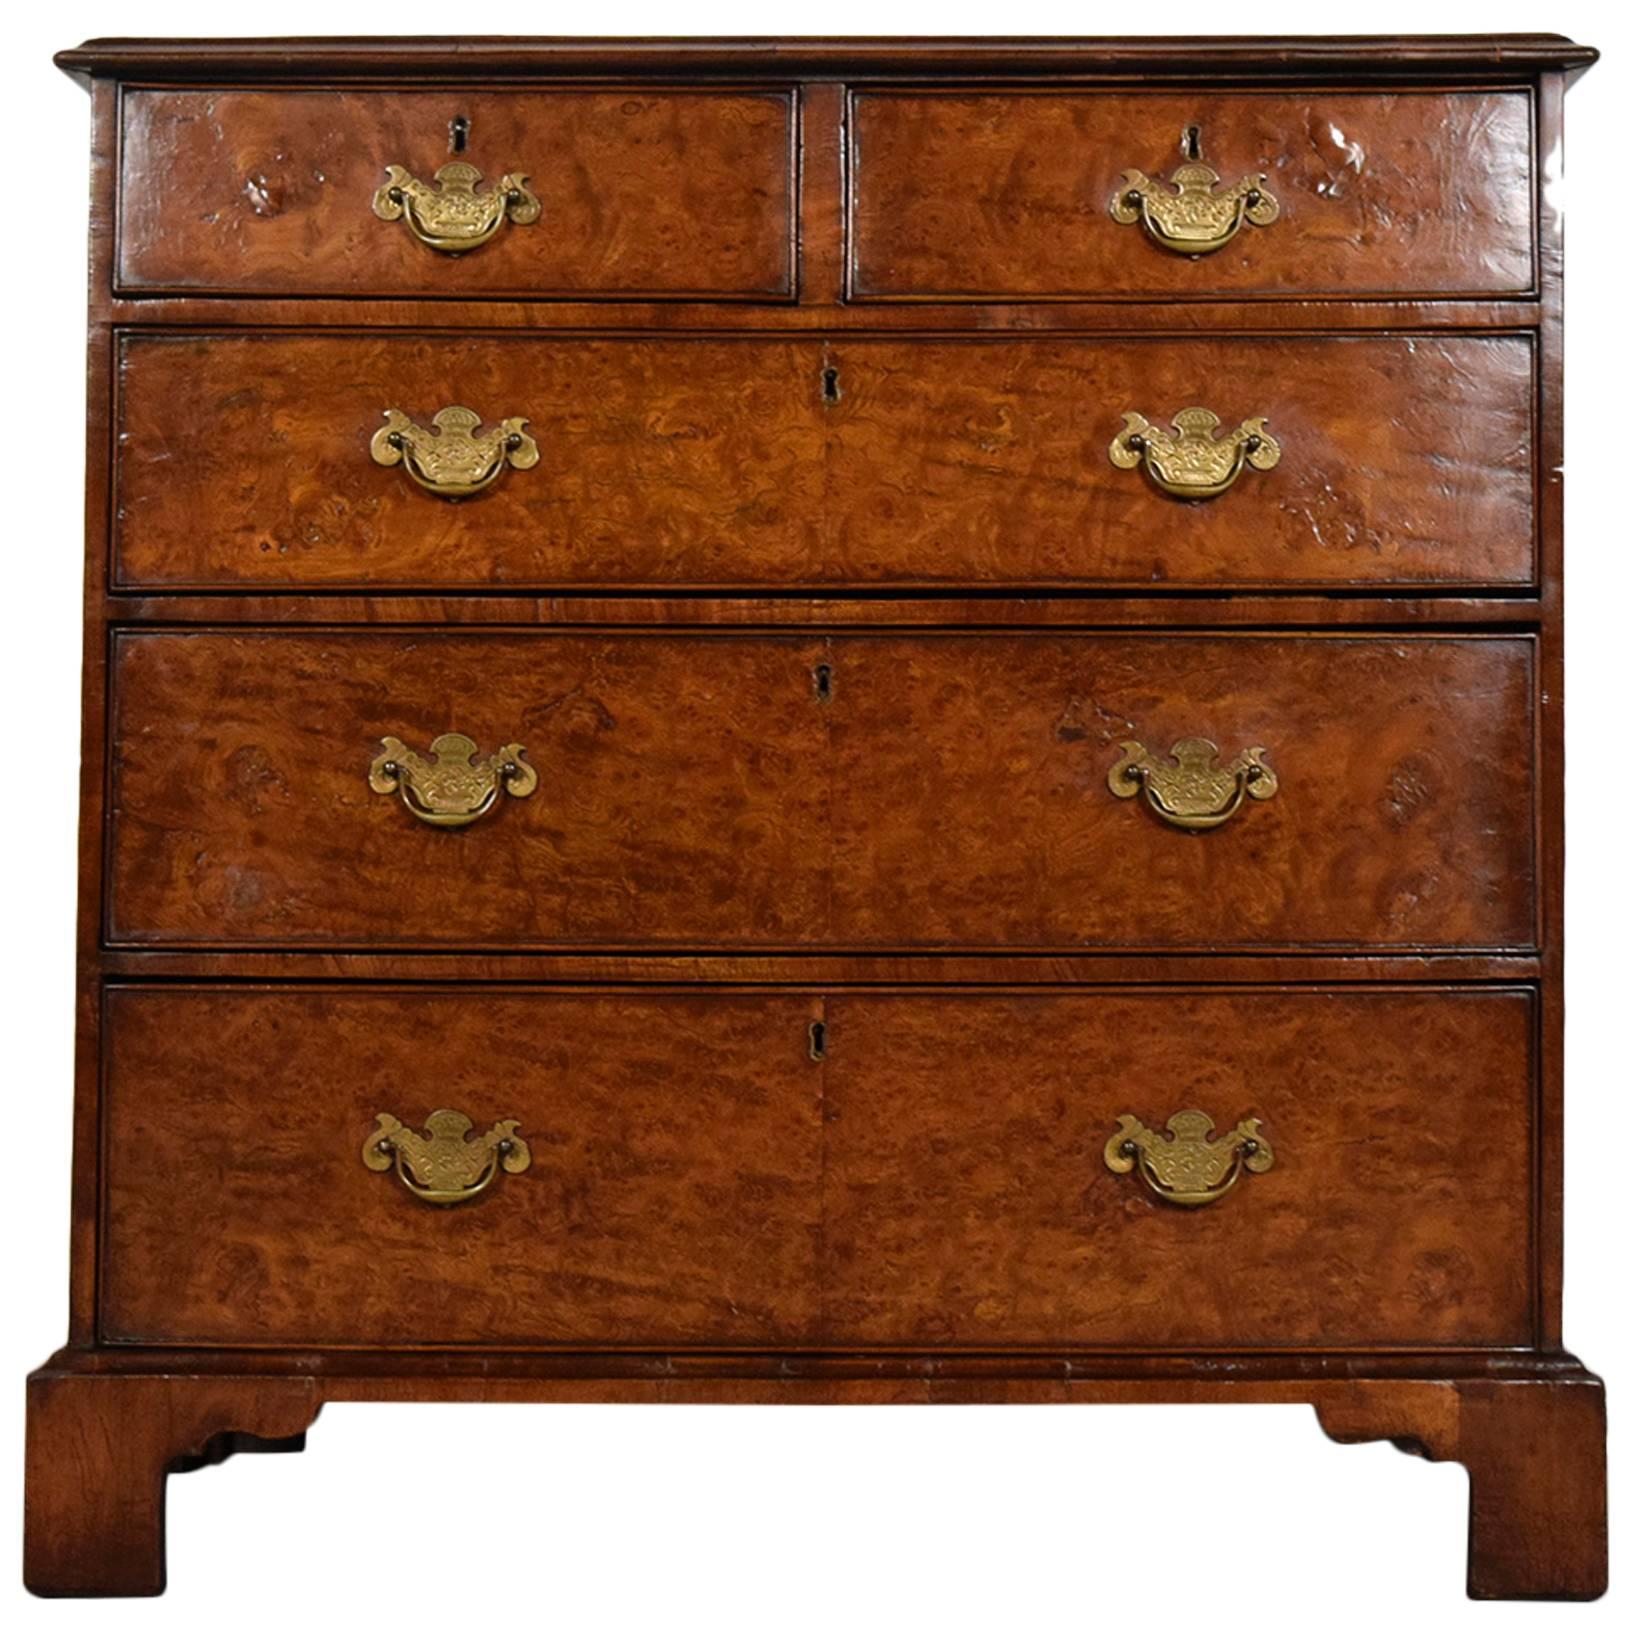 Late 18th Century English George II Chest of Drawers